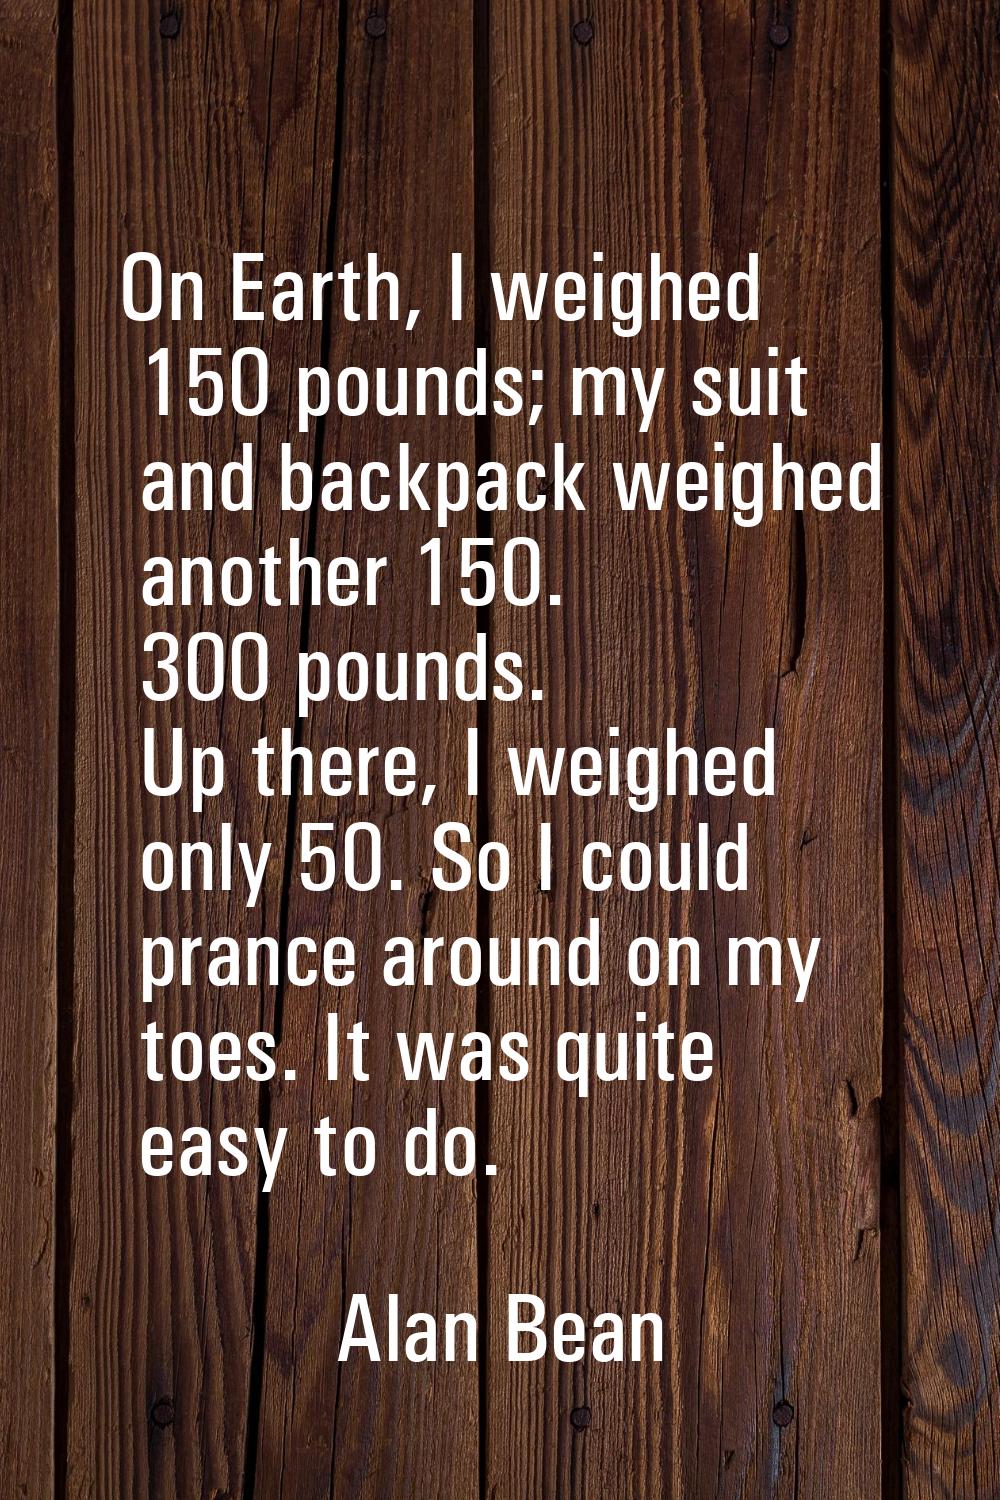 On Earth, I weighed 150 pounds; my suit and backpack weighed another 150. 300 pounds. Up there, I w